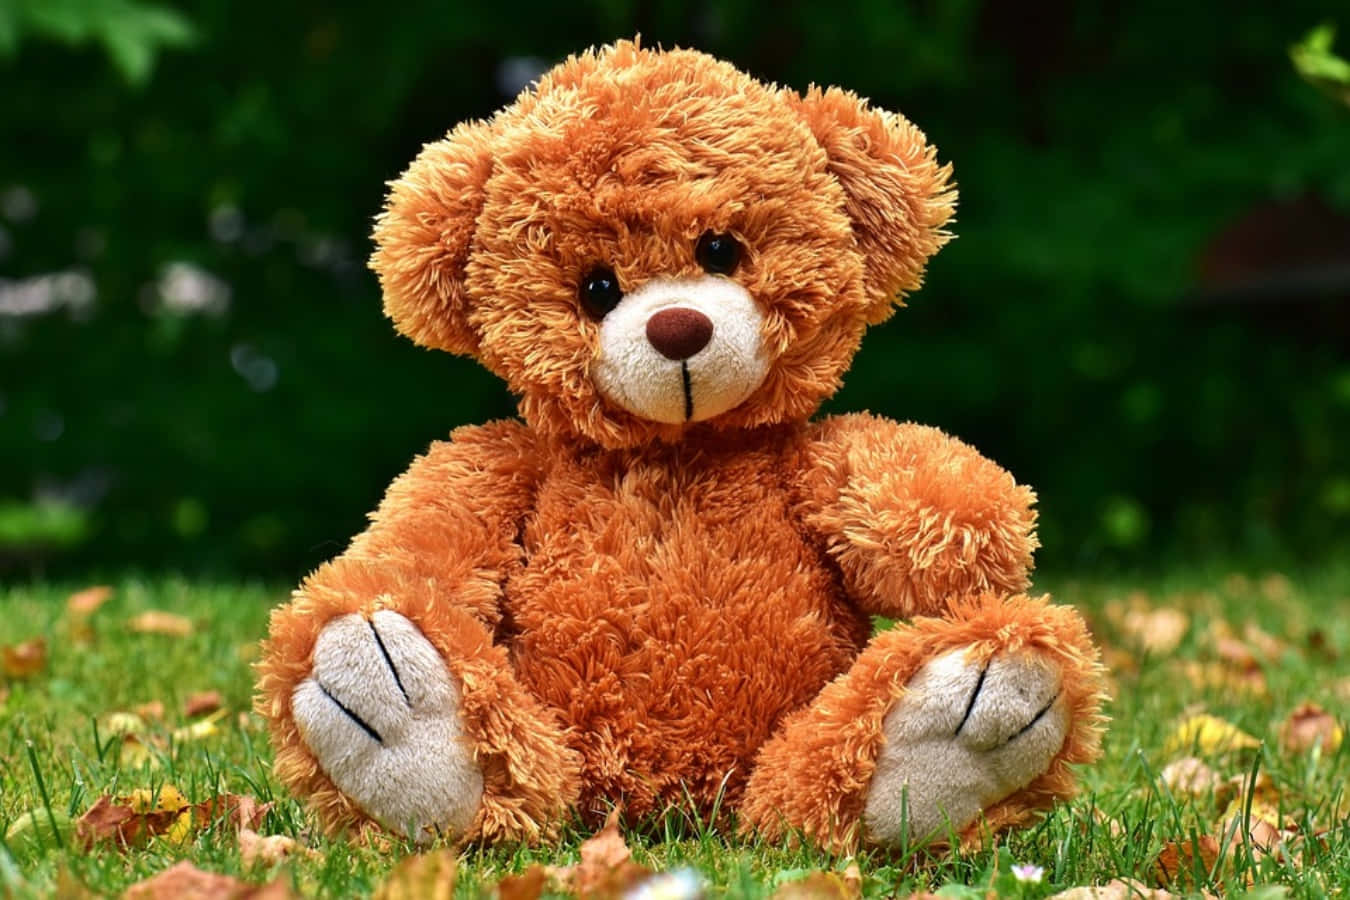 Show off your cuddly side with this cute teddy bear!